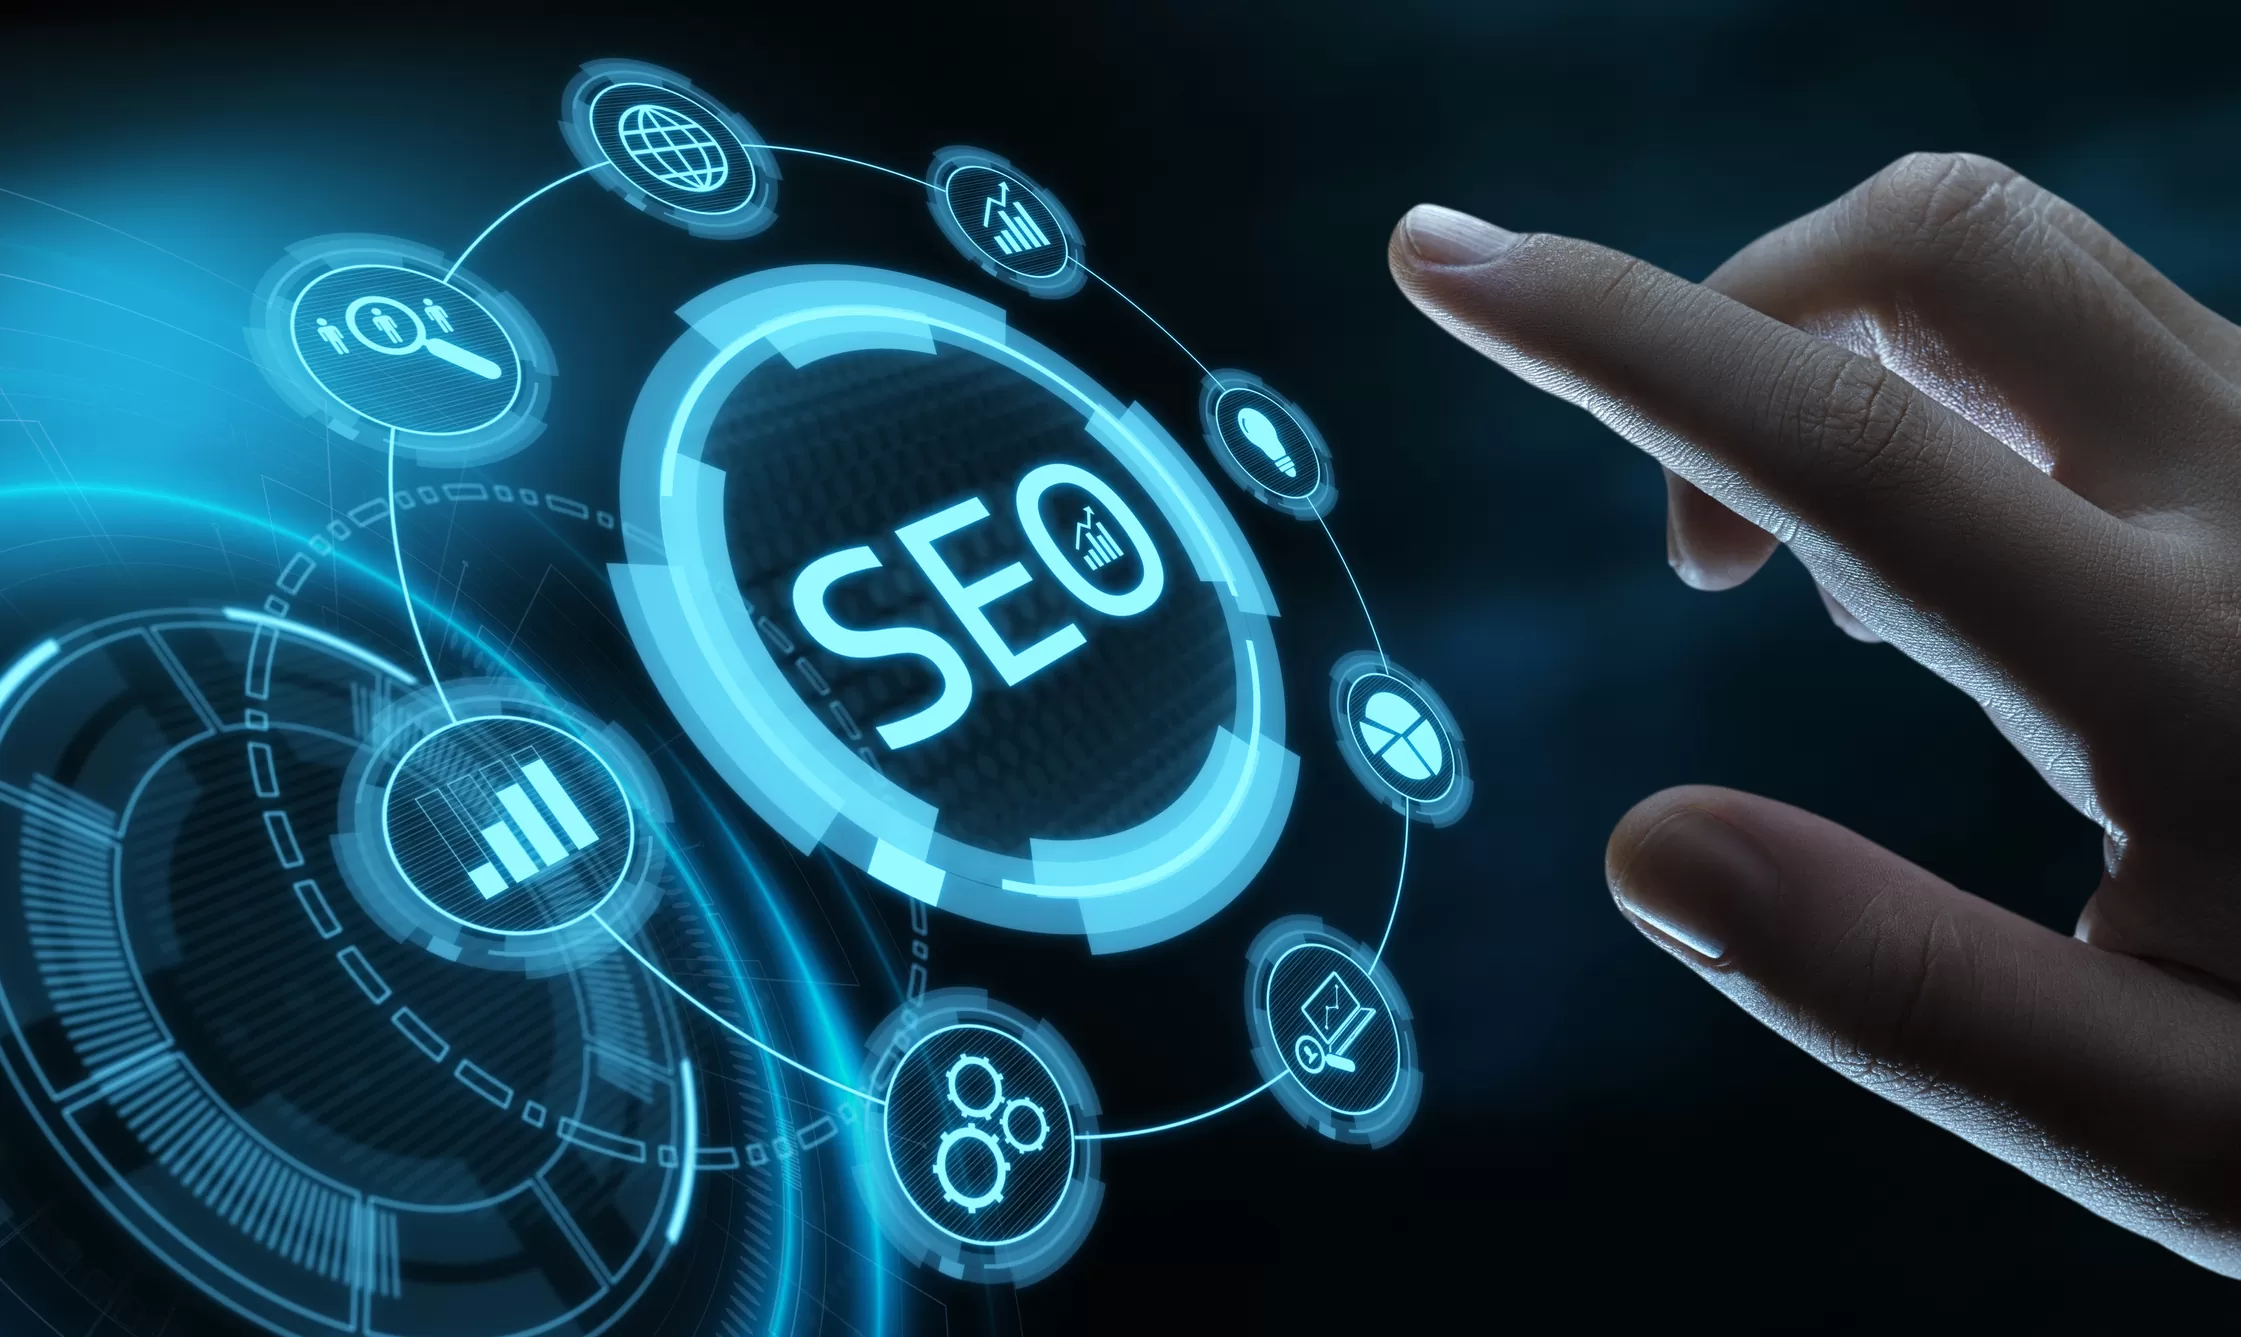 What is an example of an SEO strategy?